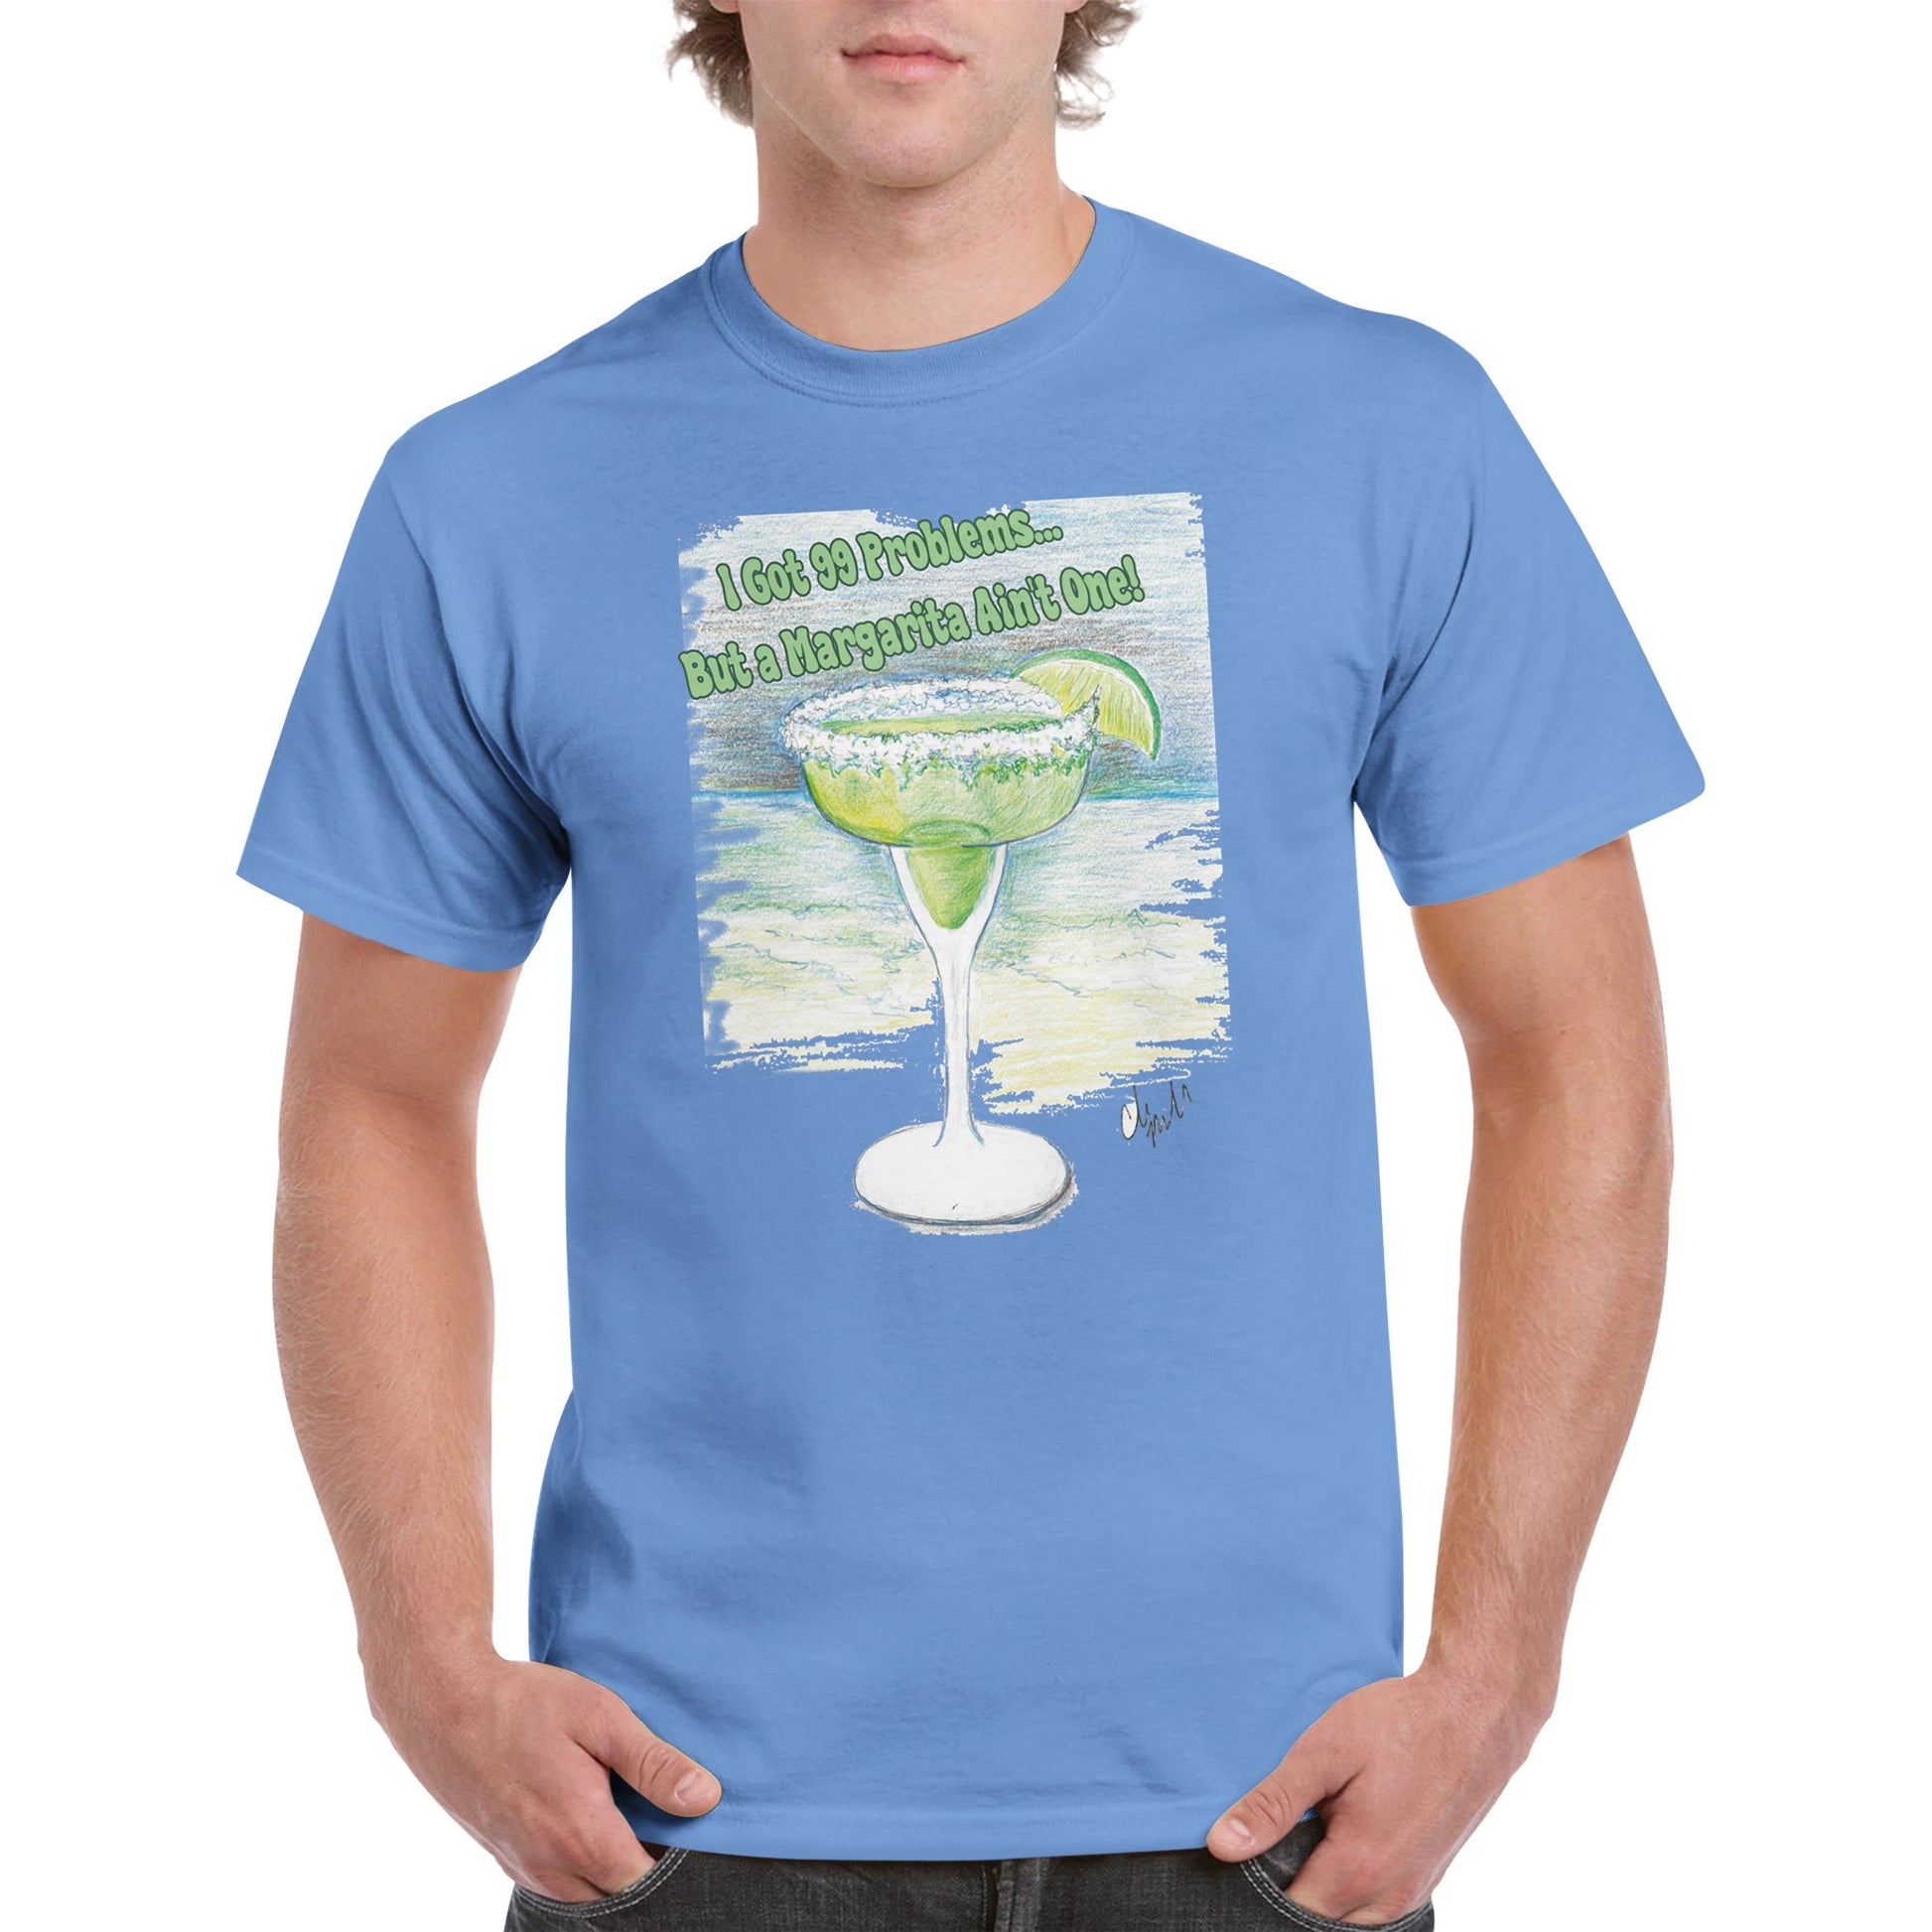 A Carolina Blue heavyweight Unisex Crewneck cotton t-shirt with original artwork I Got 99 Problems… But A Margarita Ain’t One! on the front from WhatYa Say Apparel worn by blonde-haired male front view.